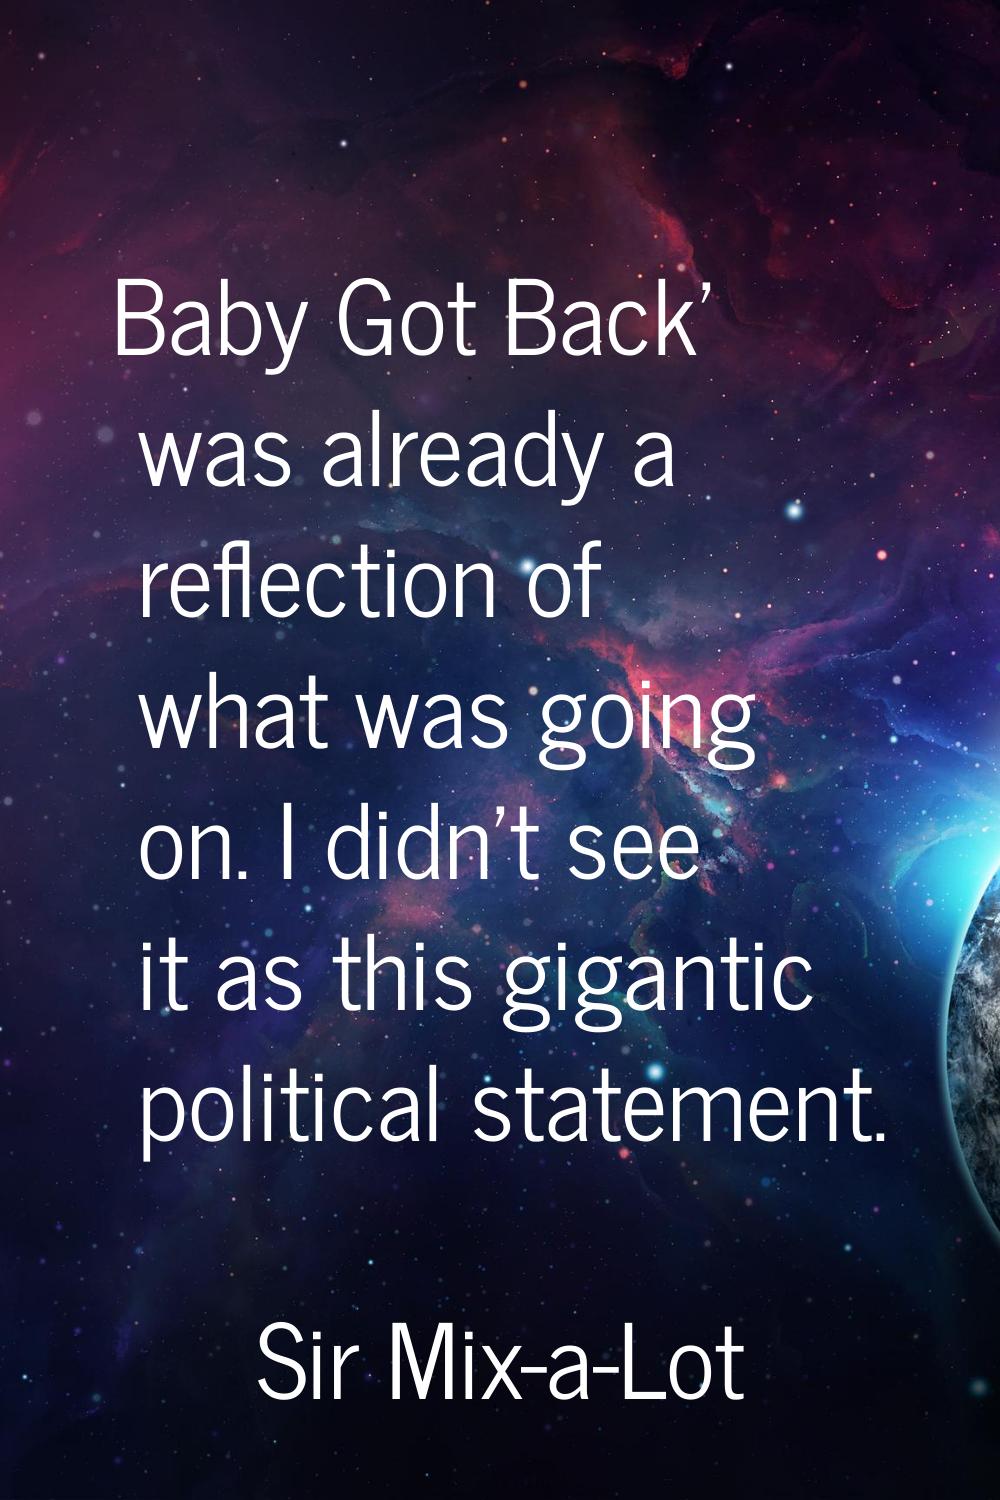 Baby Got Back' was already a reflection of what was going on. I didn't see it as this gigantic poli